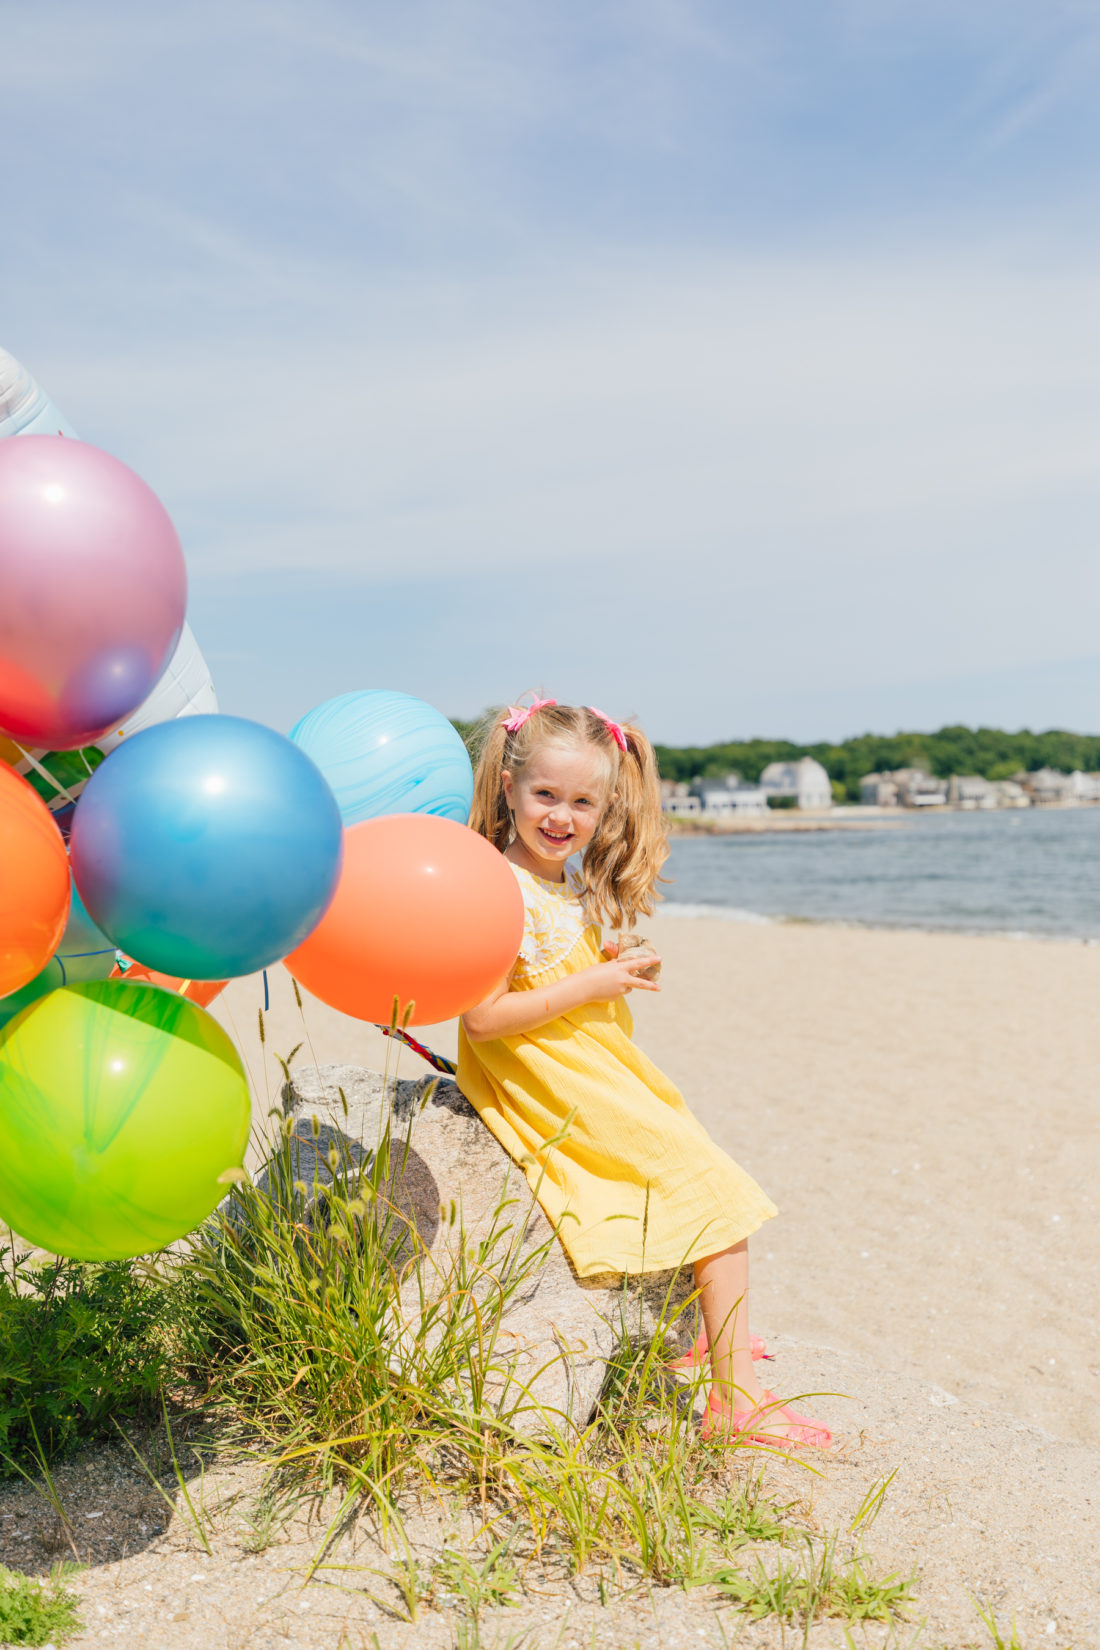 Marlowe Martino holds balloons on the beach in Connecticut to commemorate her 5th birthday